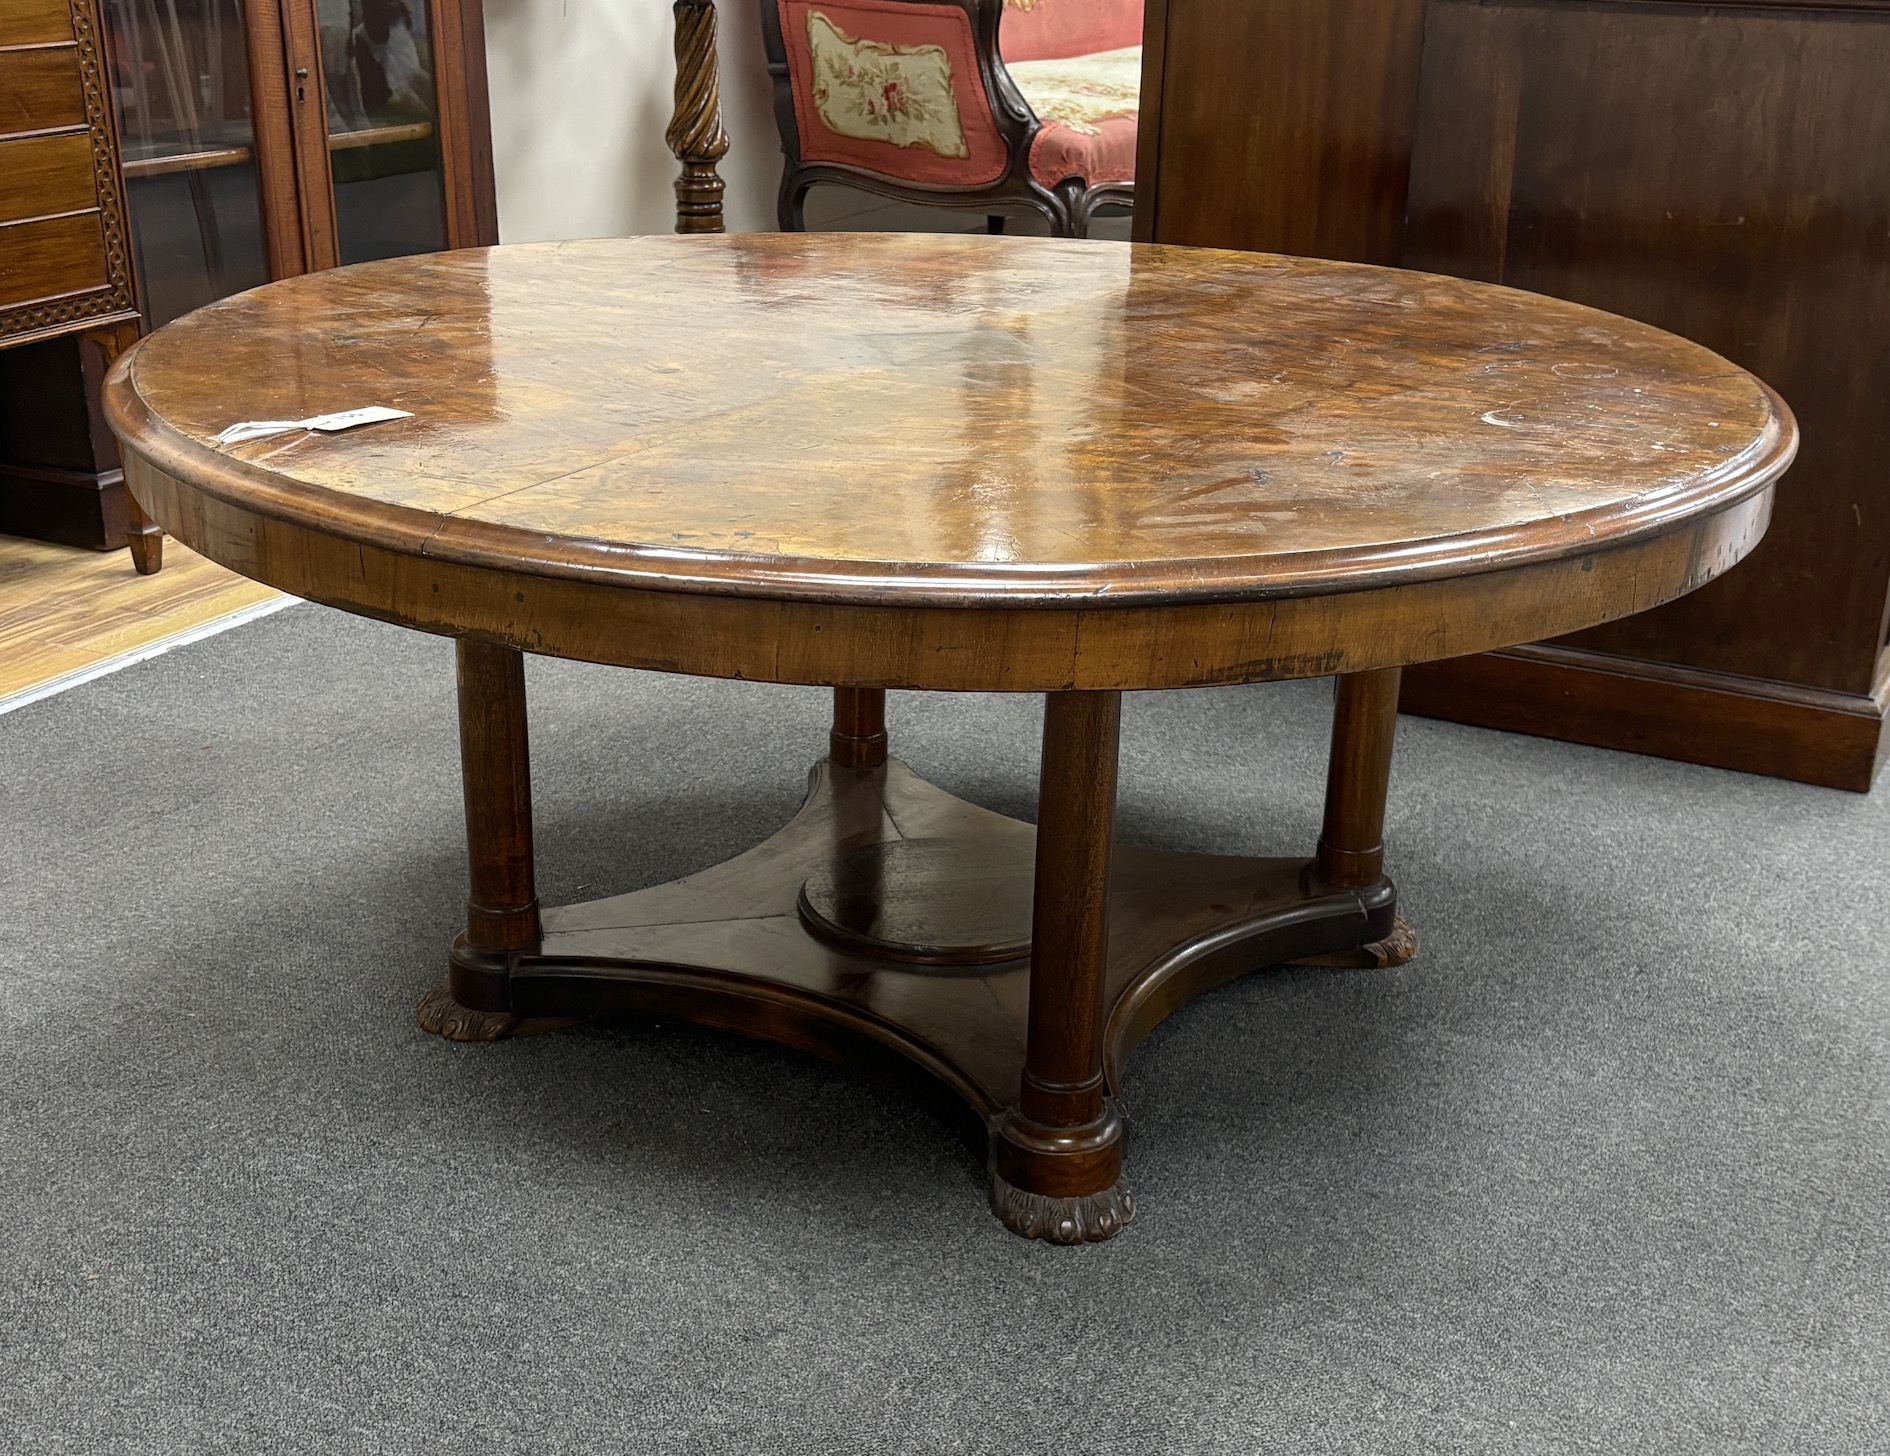 A 19th century and later circular Continental walnut low table, adapted and height reduced, diameter 120cm, height 53cm